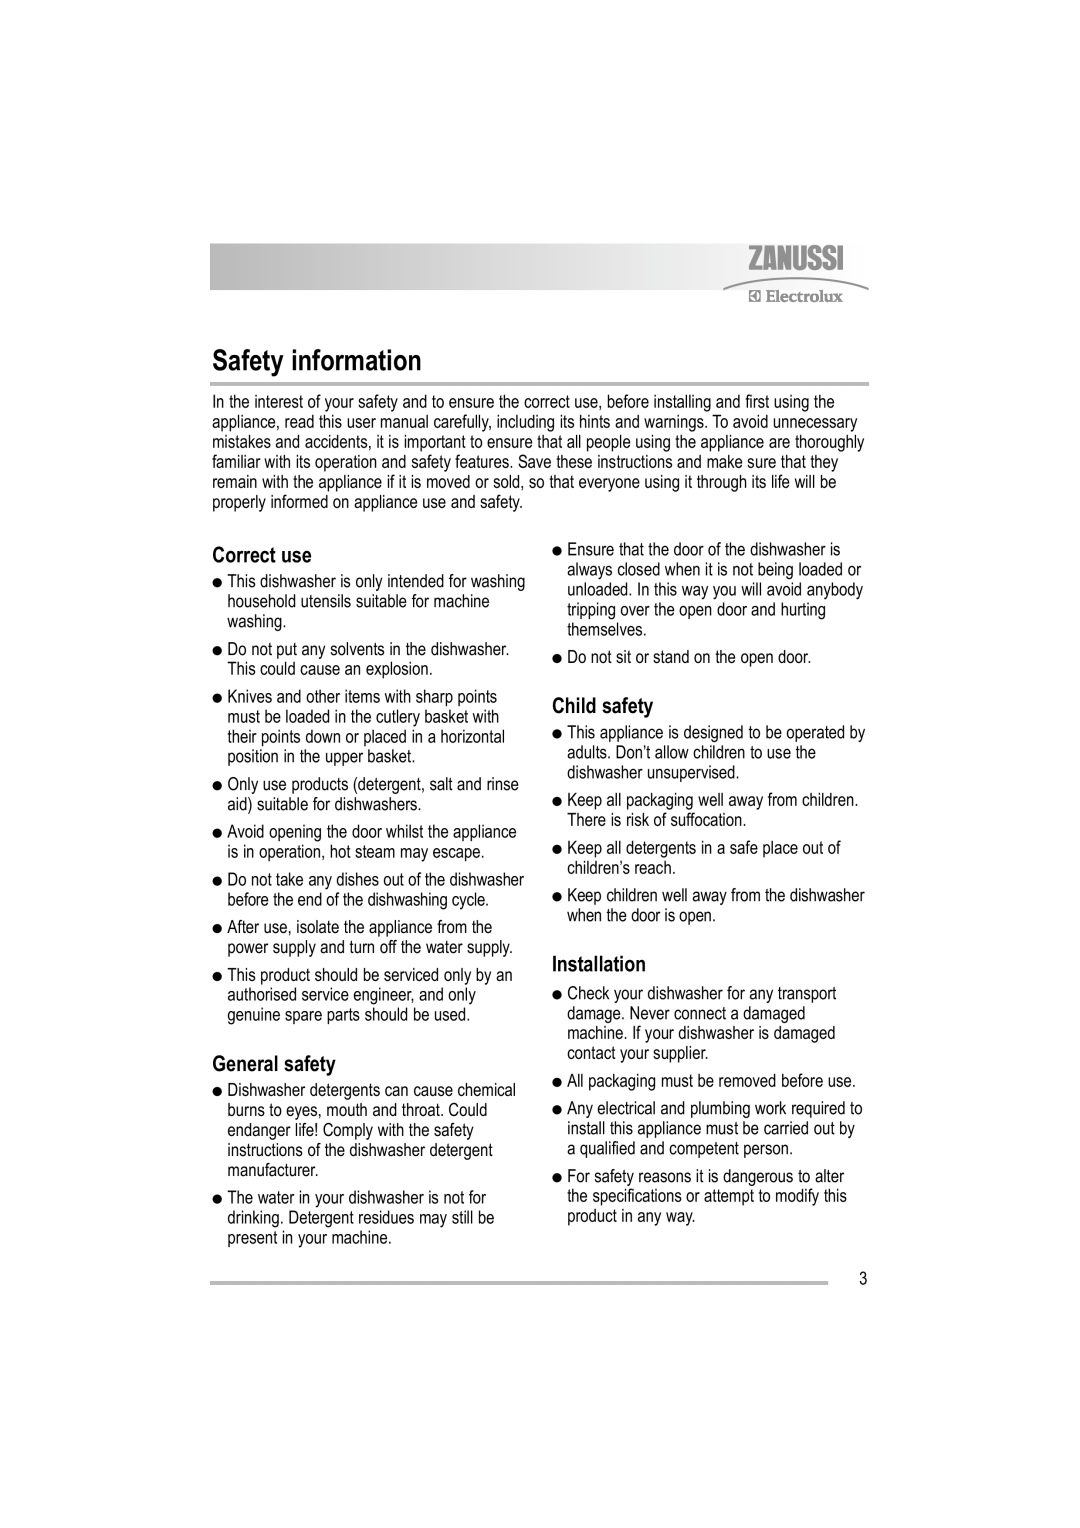 Zanussi ZDF 221 user manual Safety information, Correct use, General safety, Child safety, Installation 